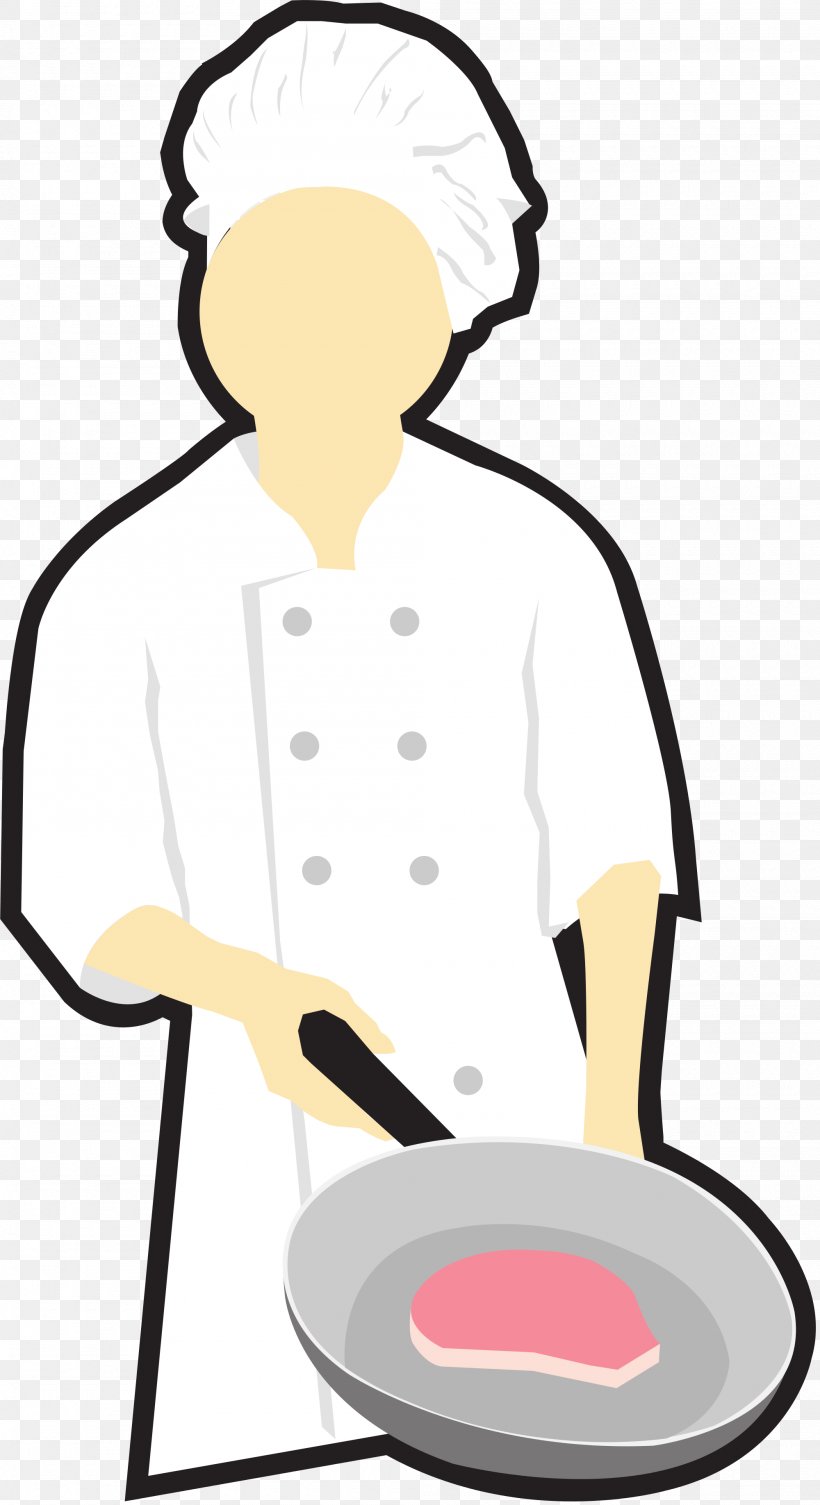 Barbecue Grill Cooking Chef Clip Art, PNG, 2000x3673px, Barbecue Grill, Artwork, Audio, Blog, Chef Download Free